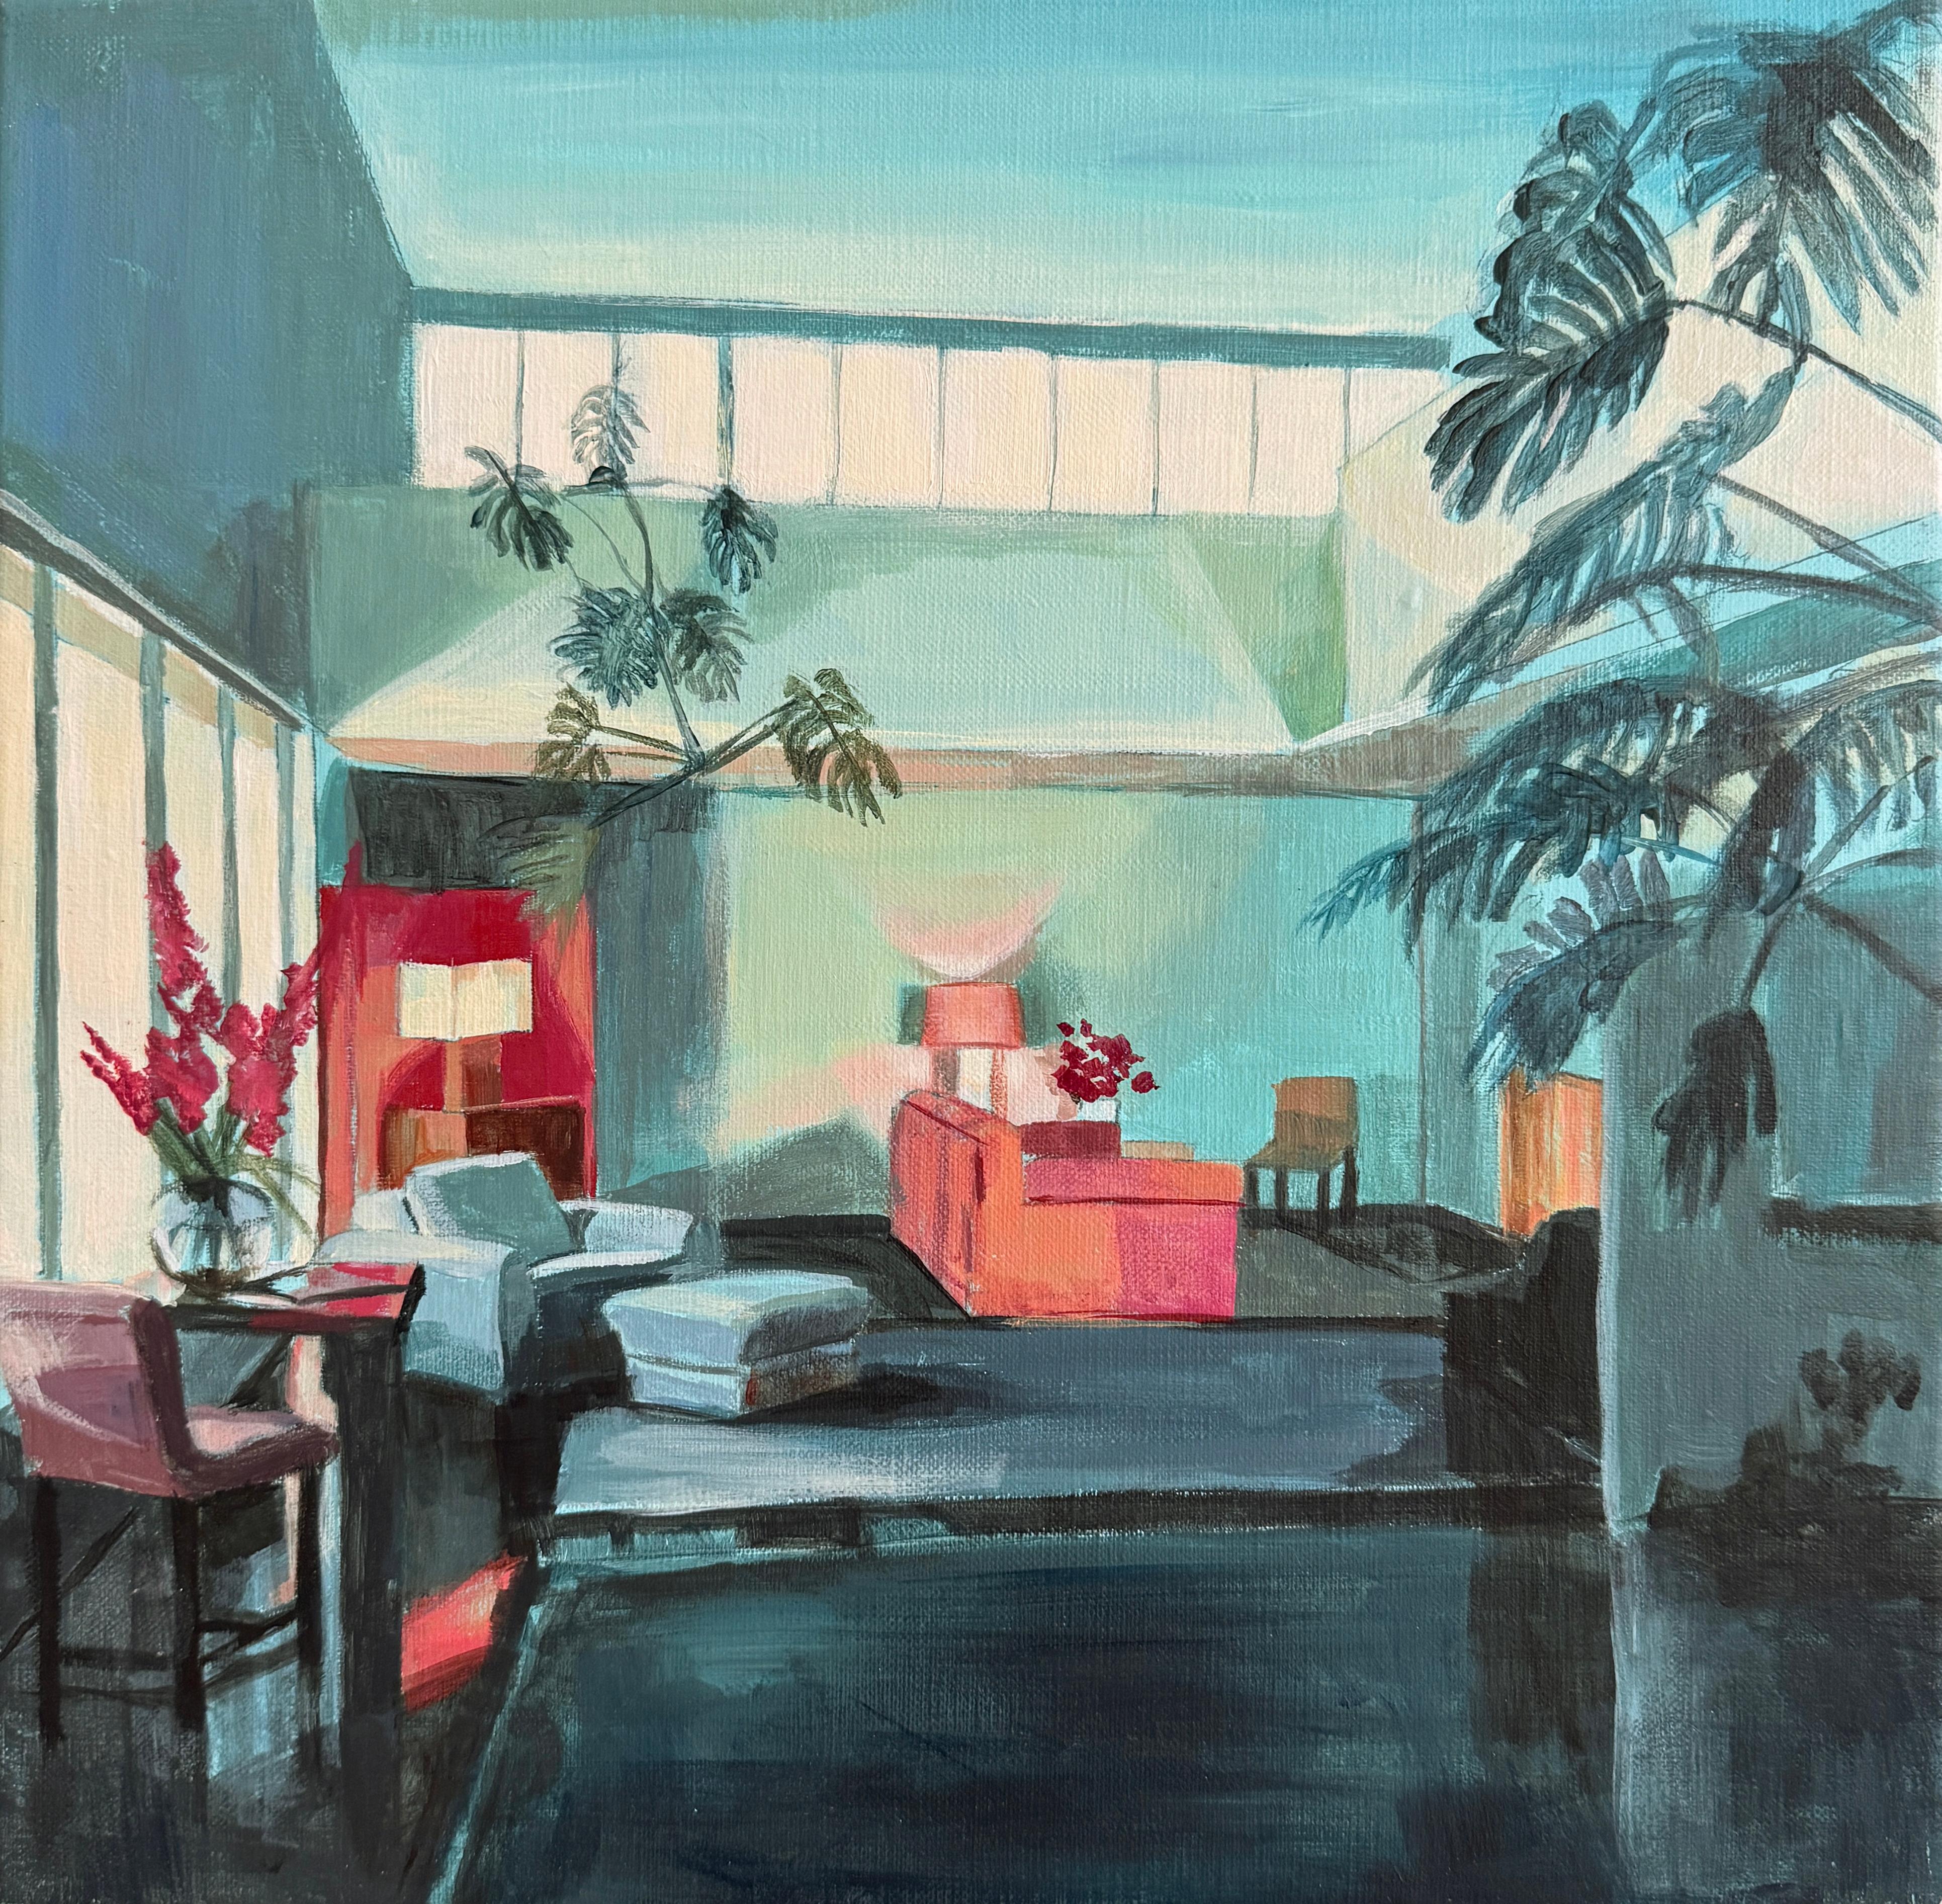 BLUE ROOM - Richard Neutra
30x30 cm
Acrylic on linen
2024

The artist, Bea Sarrias, has developed much of her work in Barcelona, where she studied Fine Arts and soon became interested in architecture and the portrayal of iconic spaces. Her work,